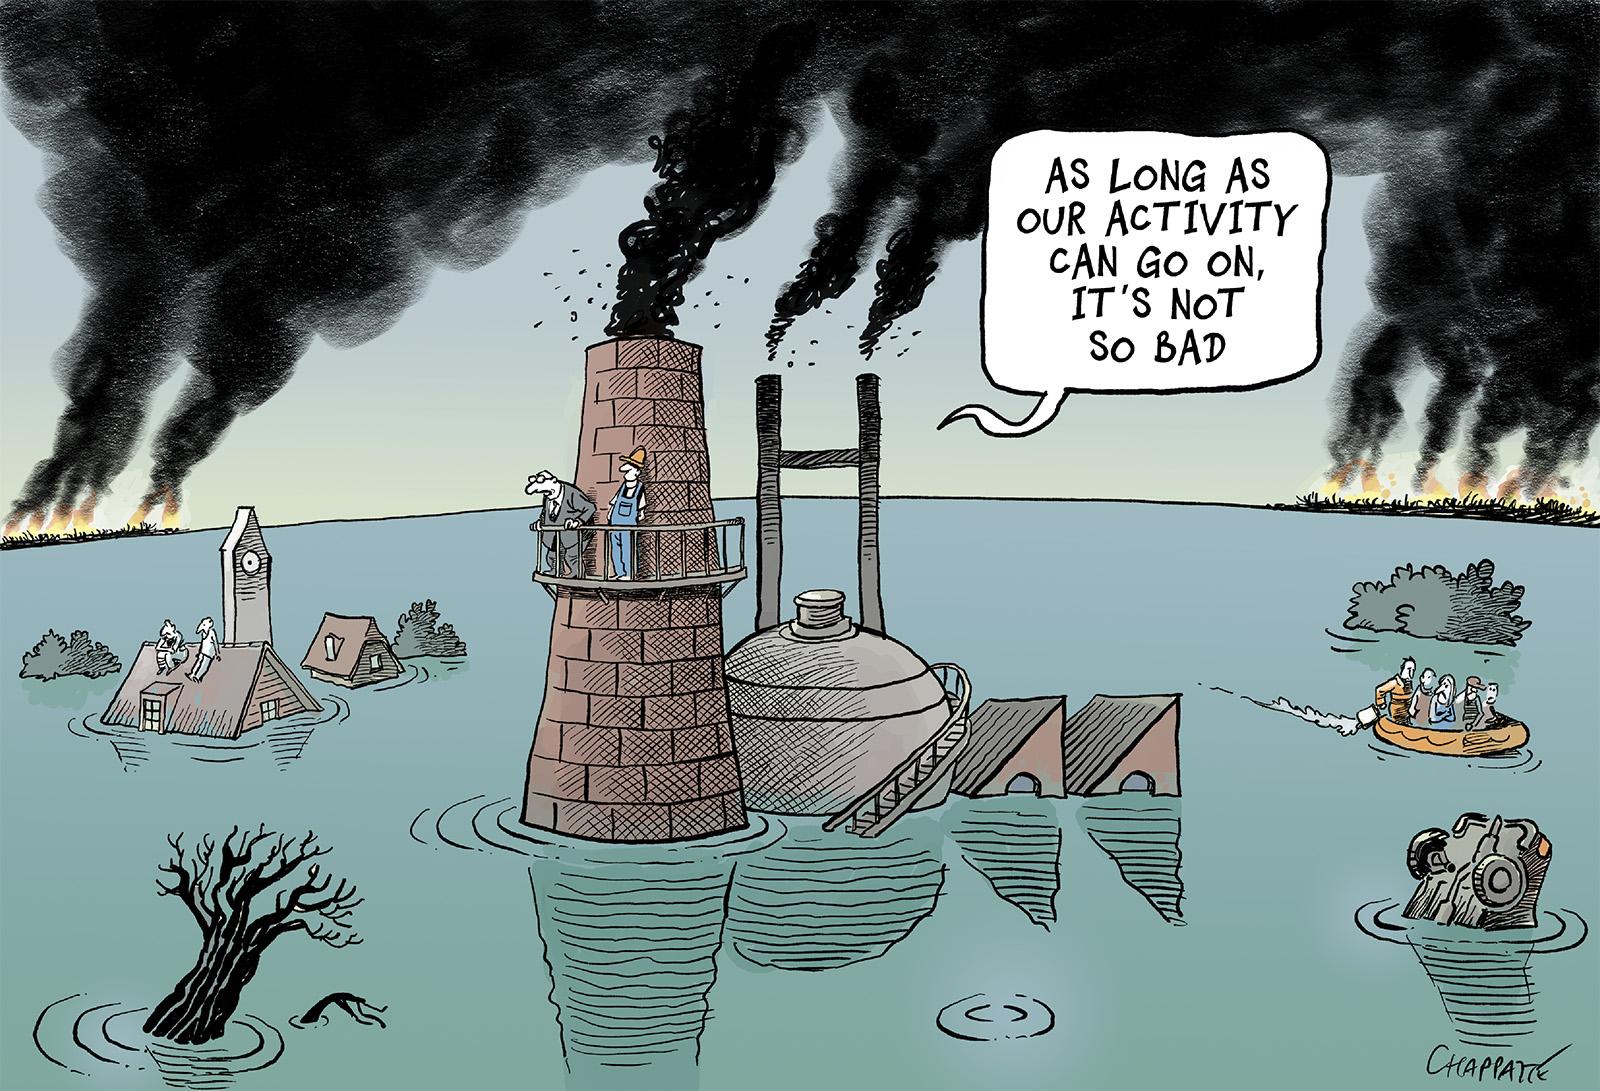 The climate situation